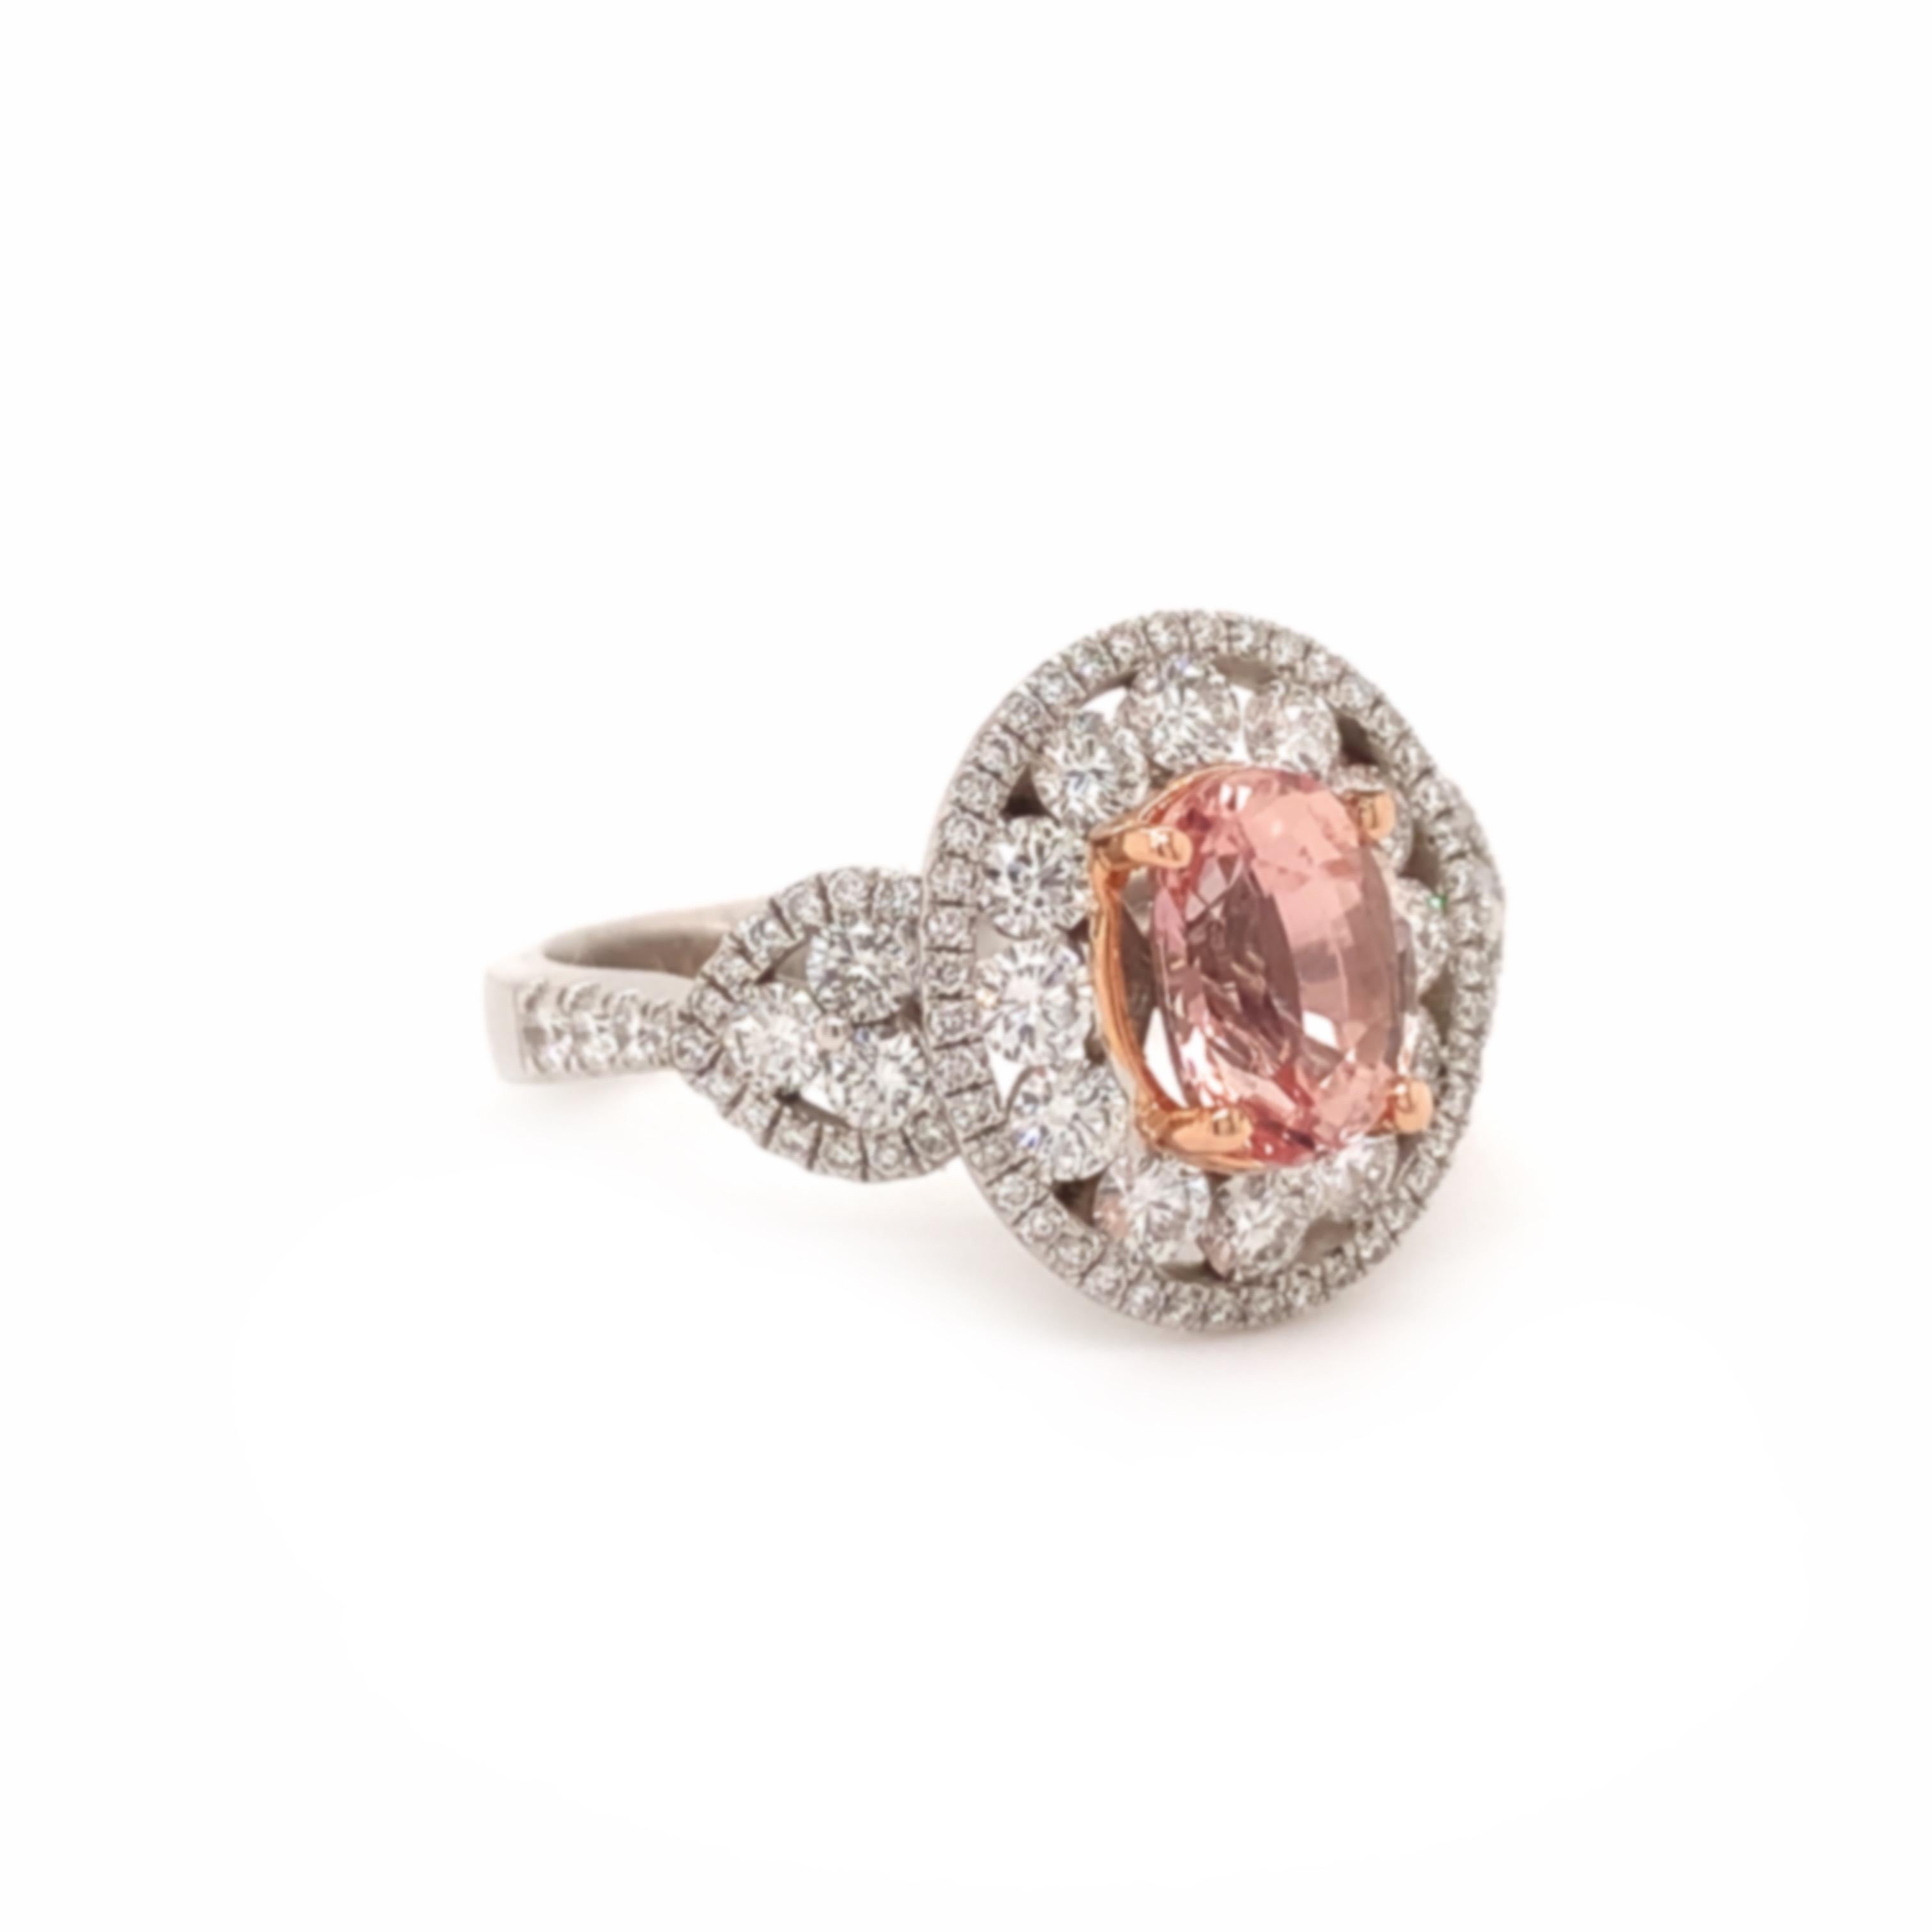 Glamorous unheated padparadscha sapphire ring. High brilliance, oval faceted, rare unheated, 